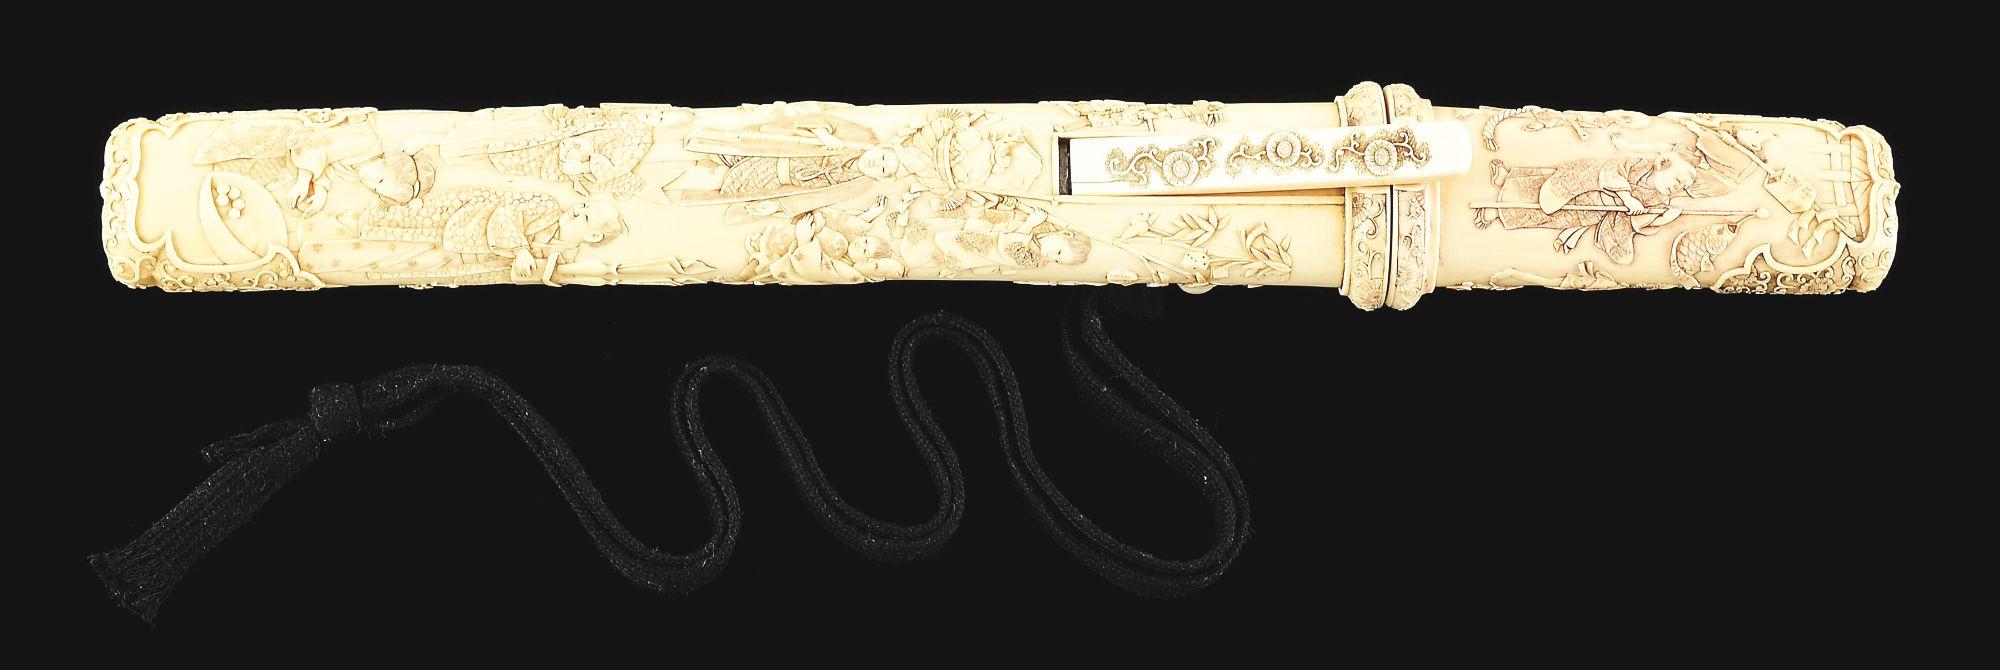 AN UNUSUALLY GOOD QUALITY IVORY MOUNTED TANTO.